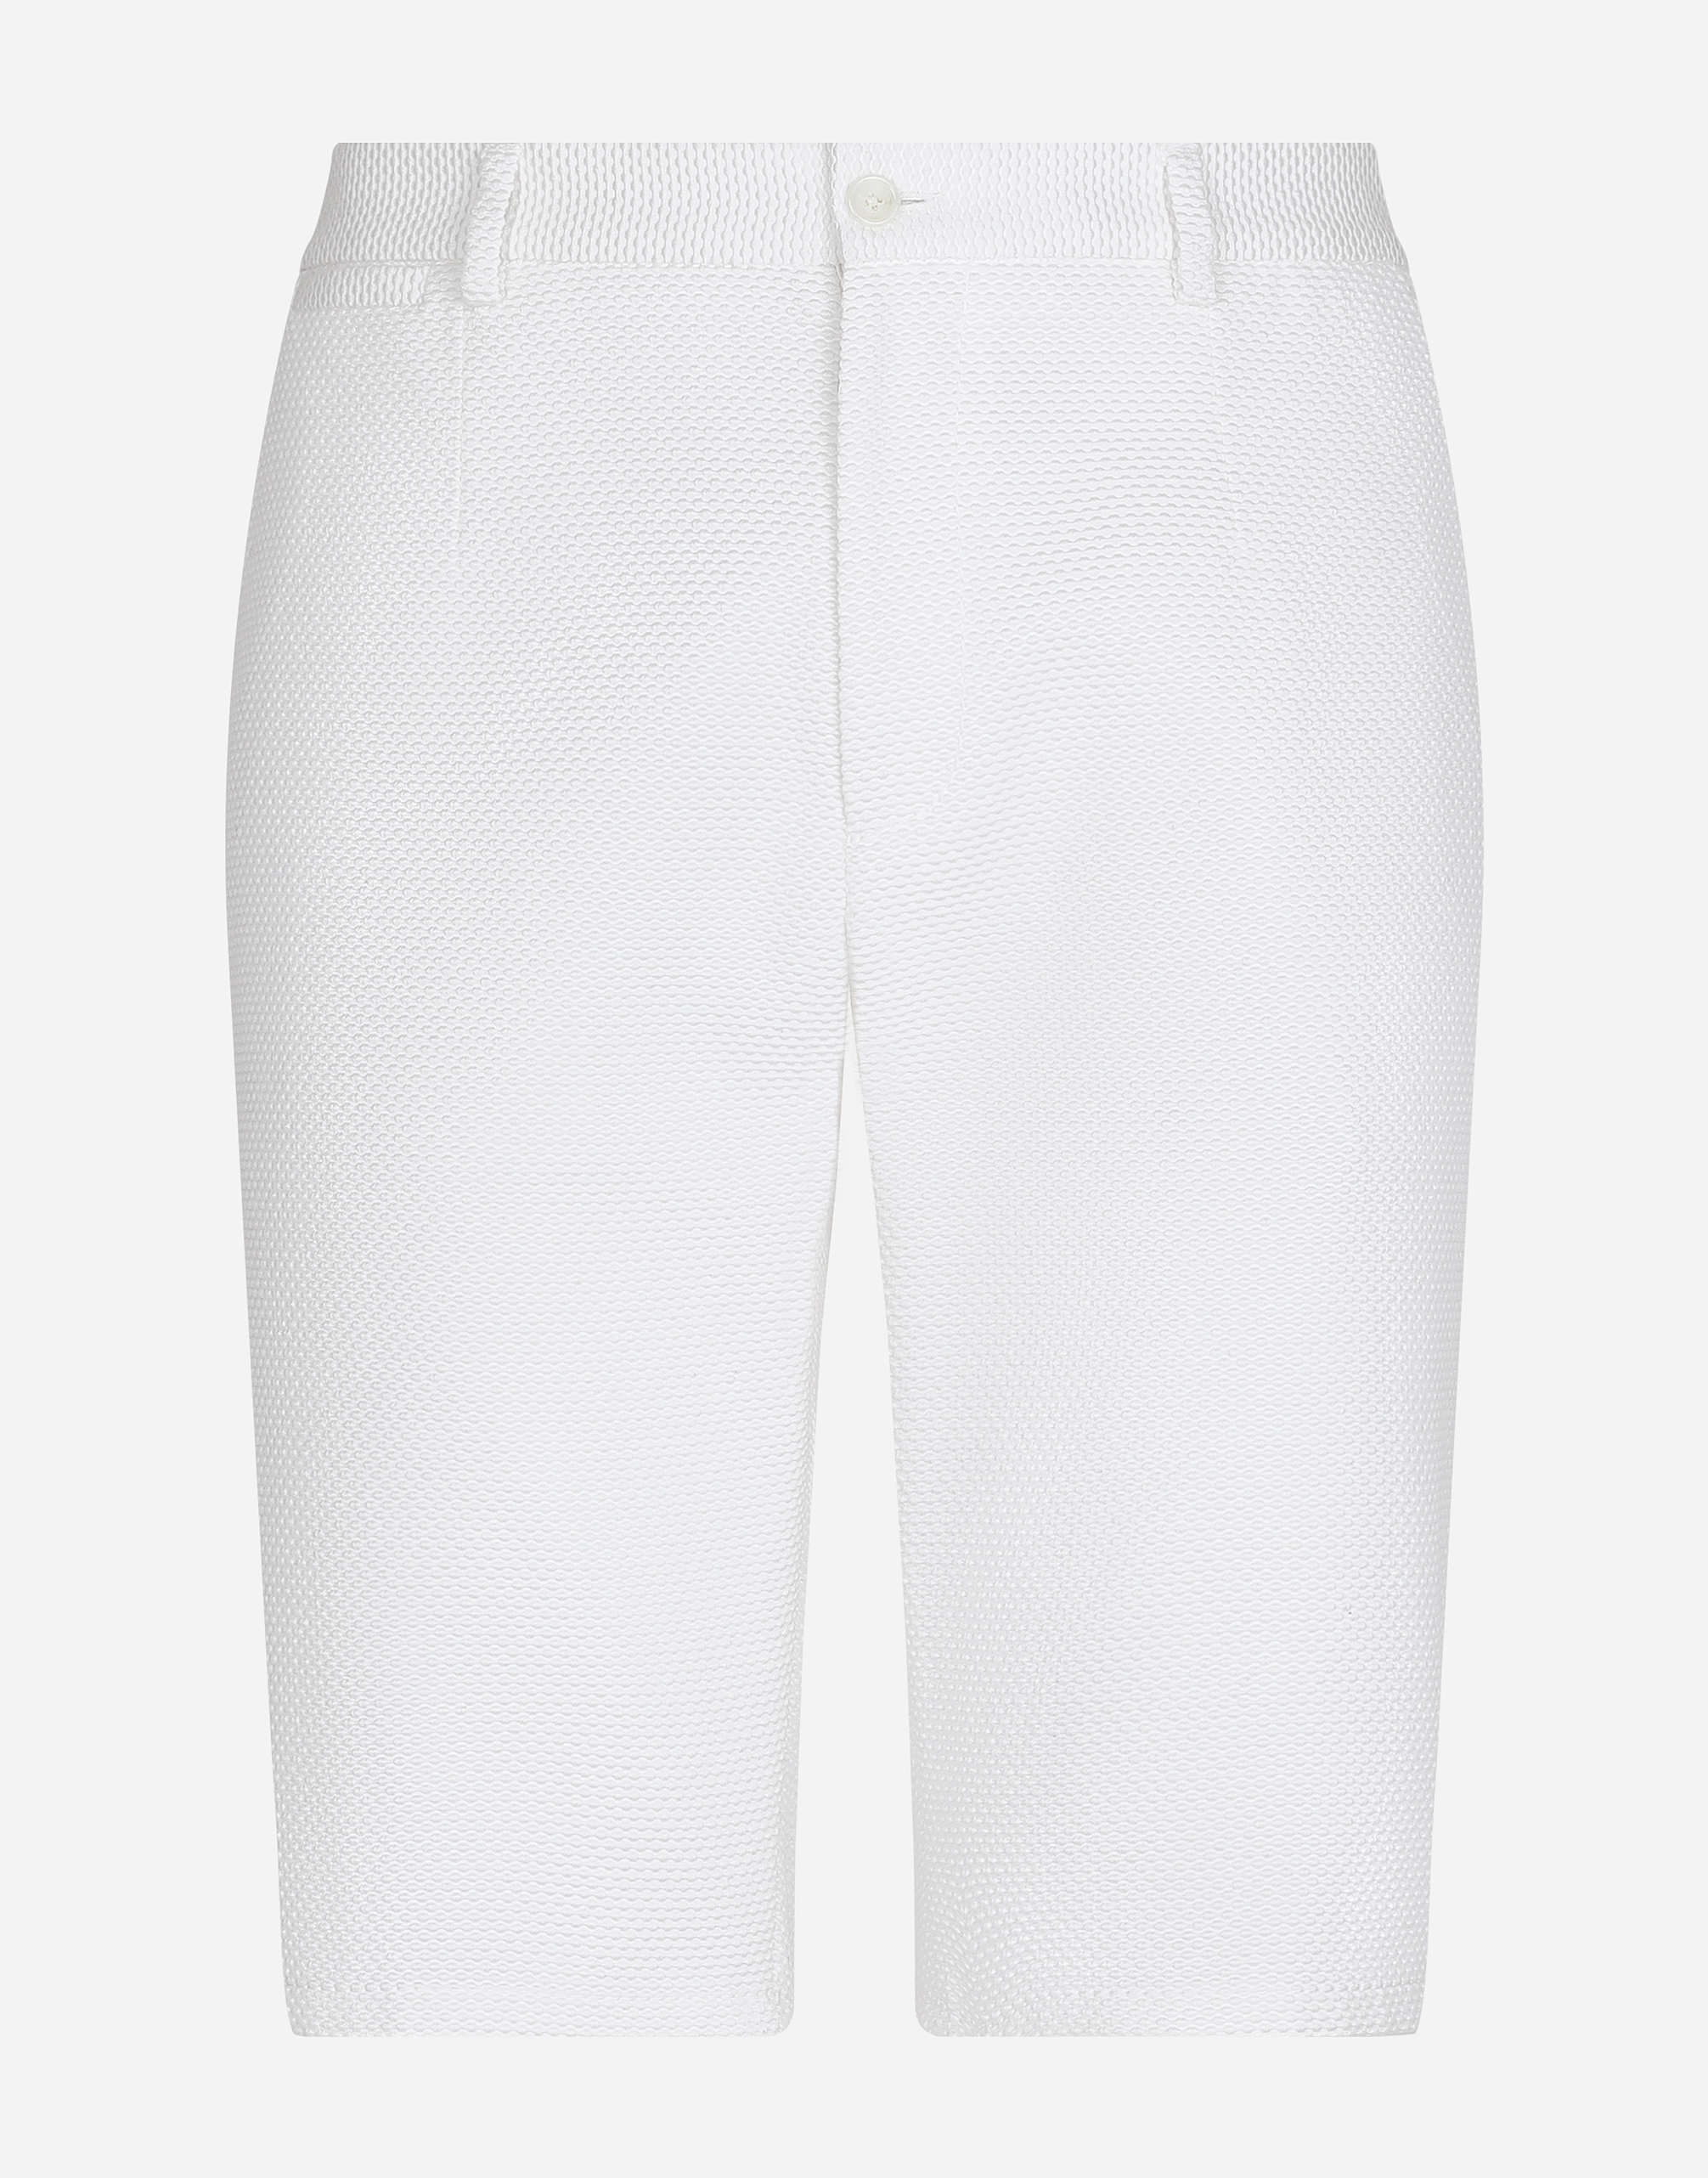 Stretch cotton shorts in White